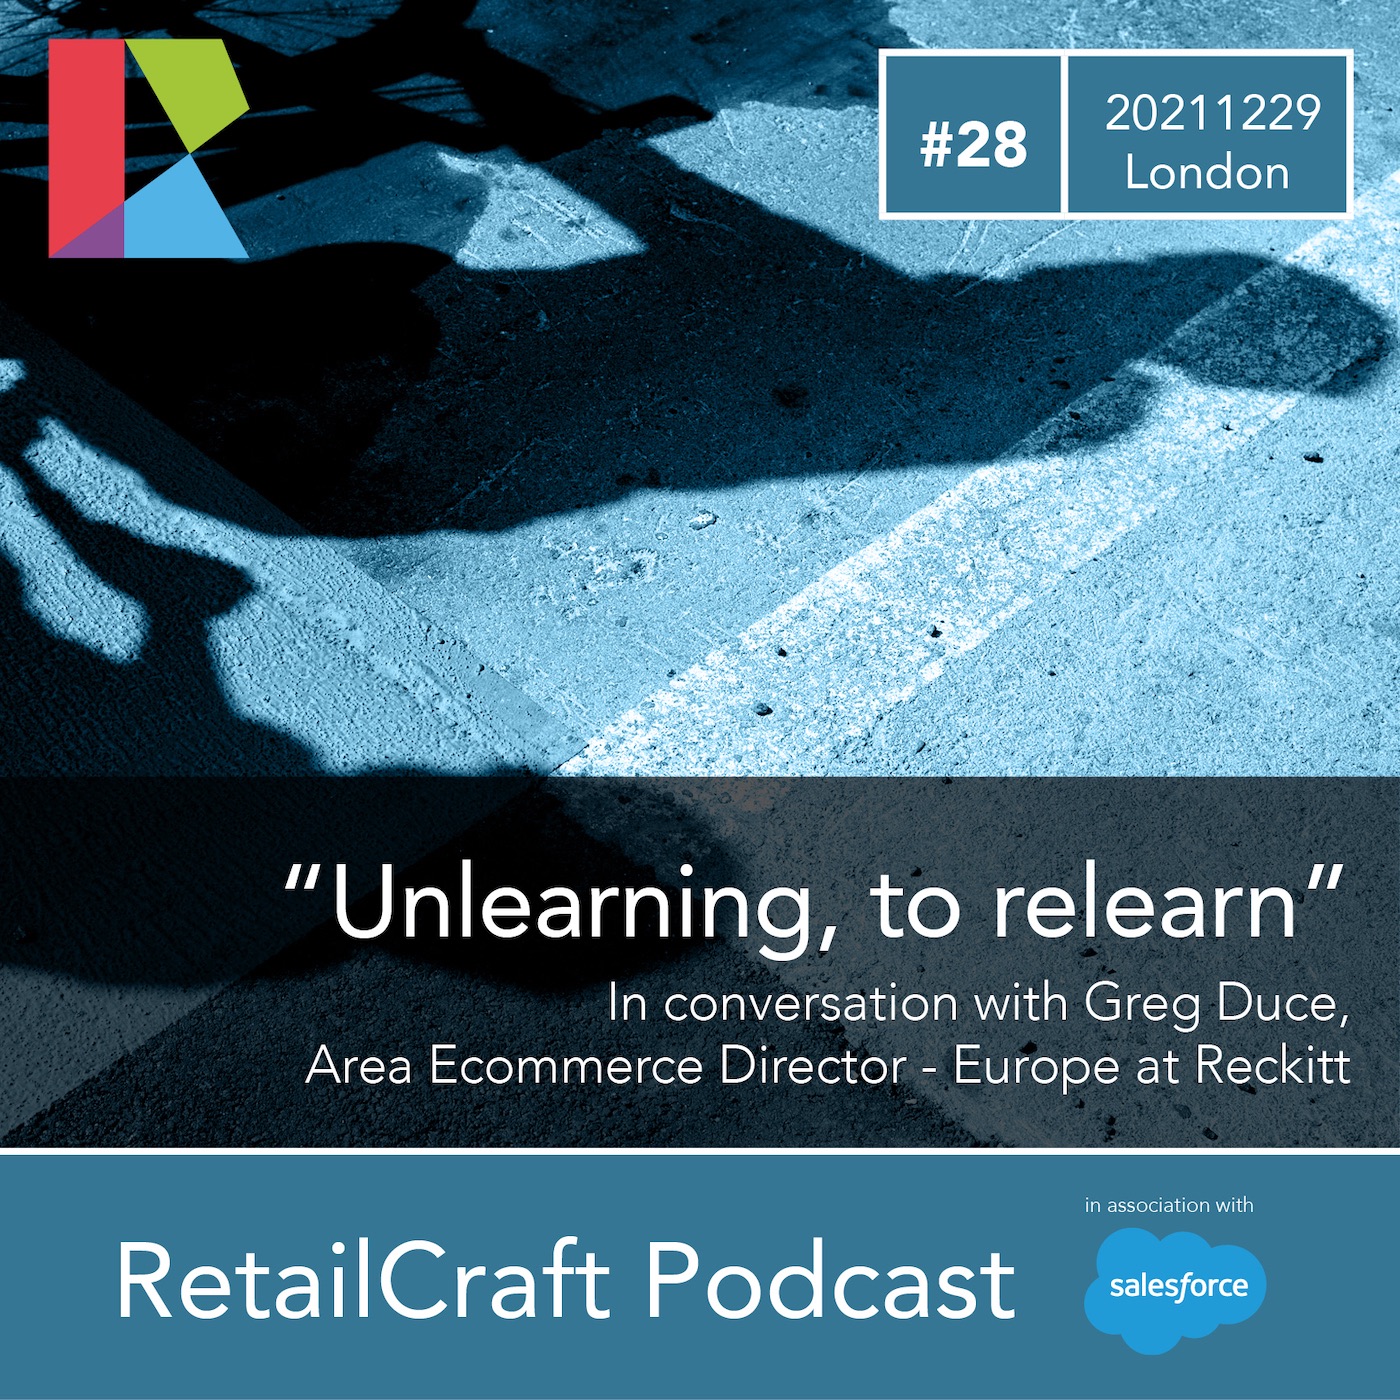 RetailCraft 28 – ”Unlearning, to relearn” – Greg Duce of Reckitt